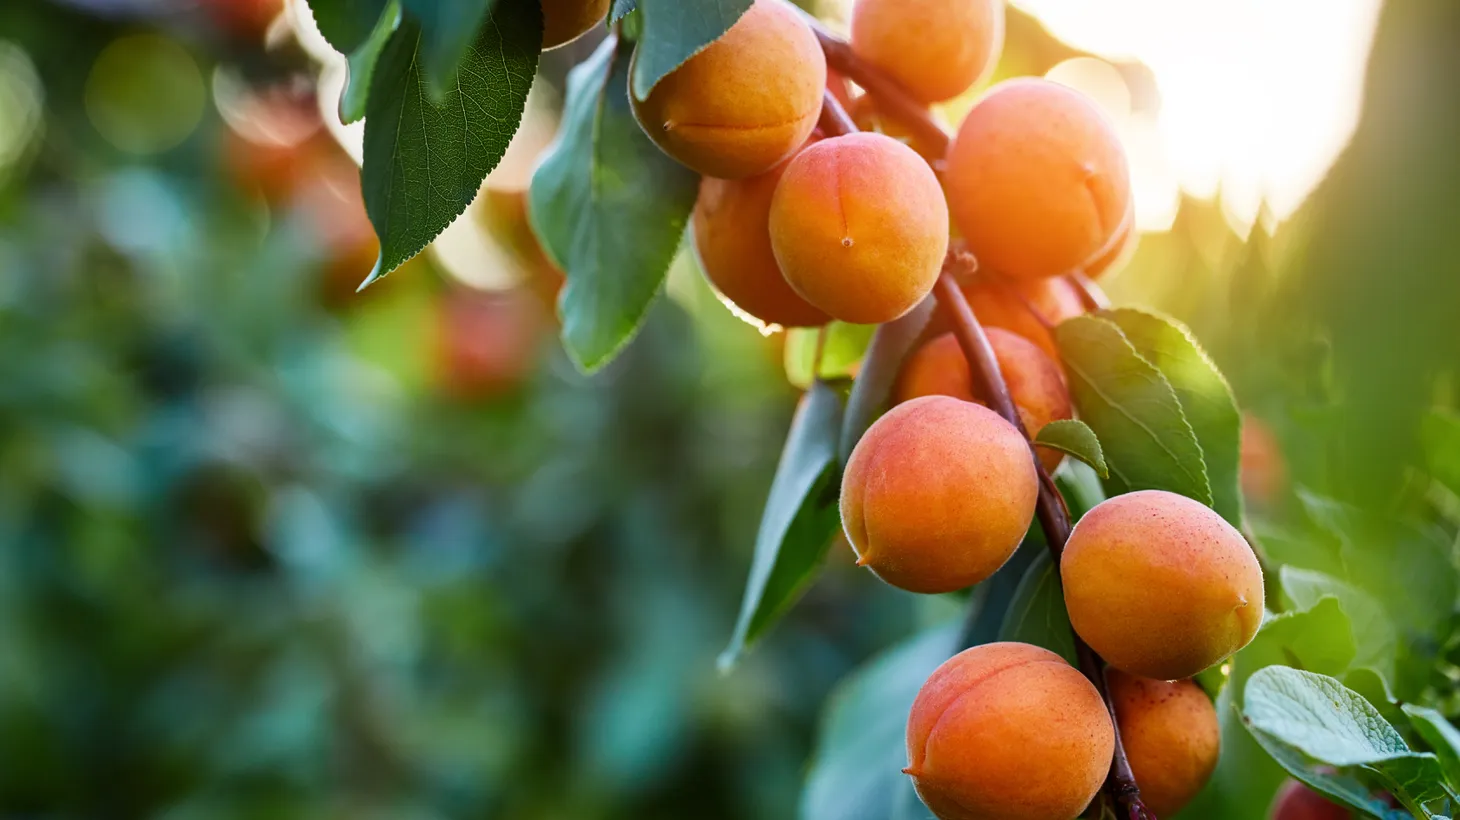 Apricot kernels can be toxic for small children. They can also be used as medicine for sick adults and a secret source of flavor for cooks.